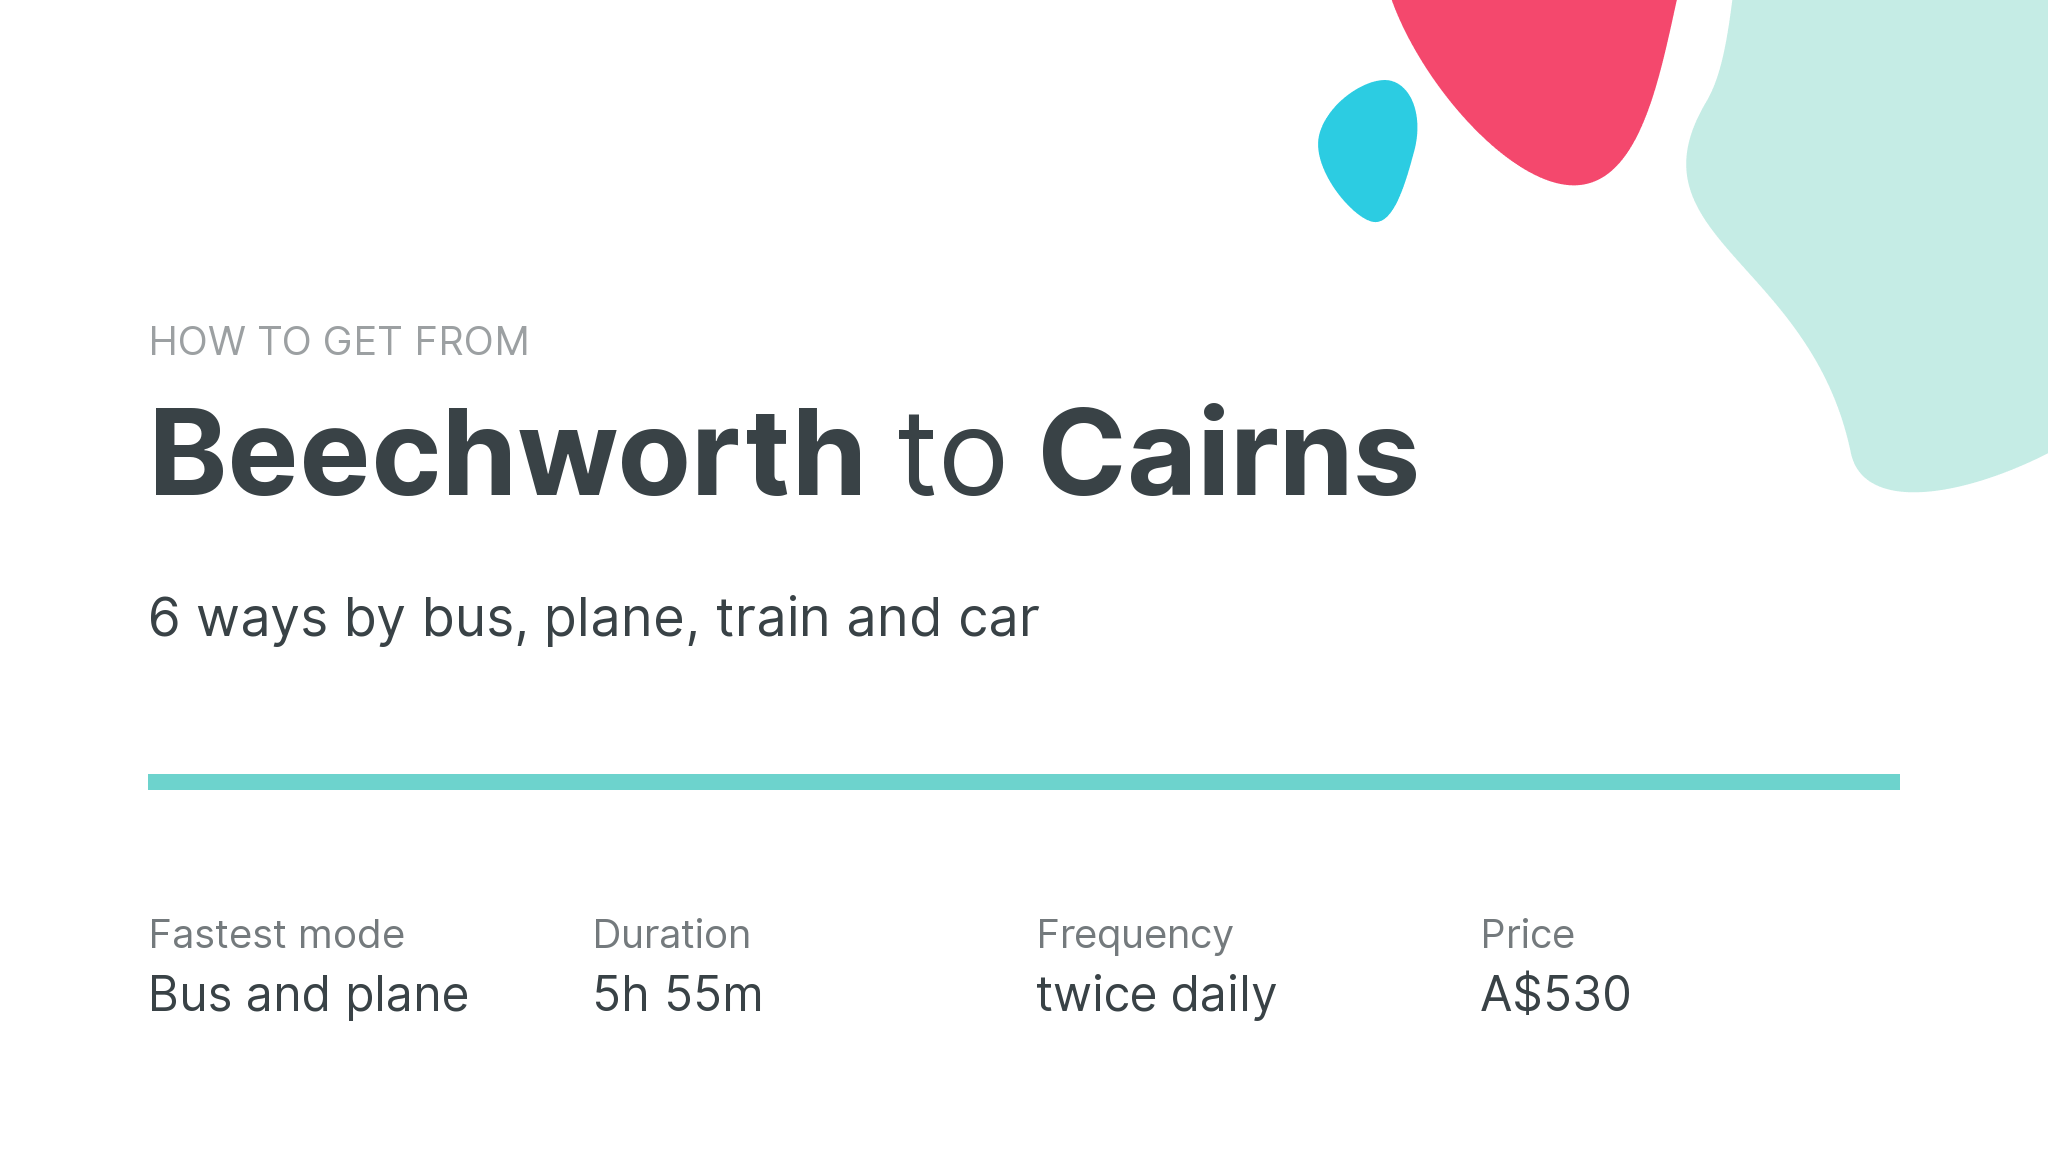 How do I get from Beechworth to Cairns